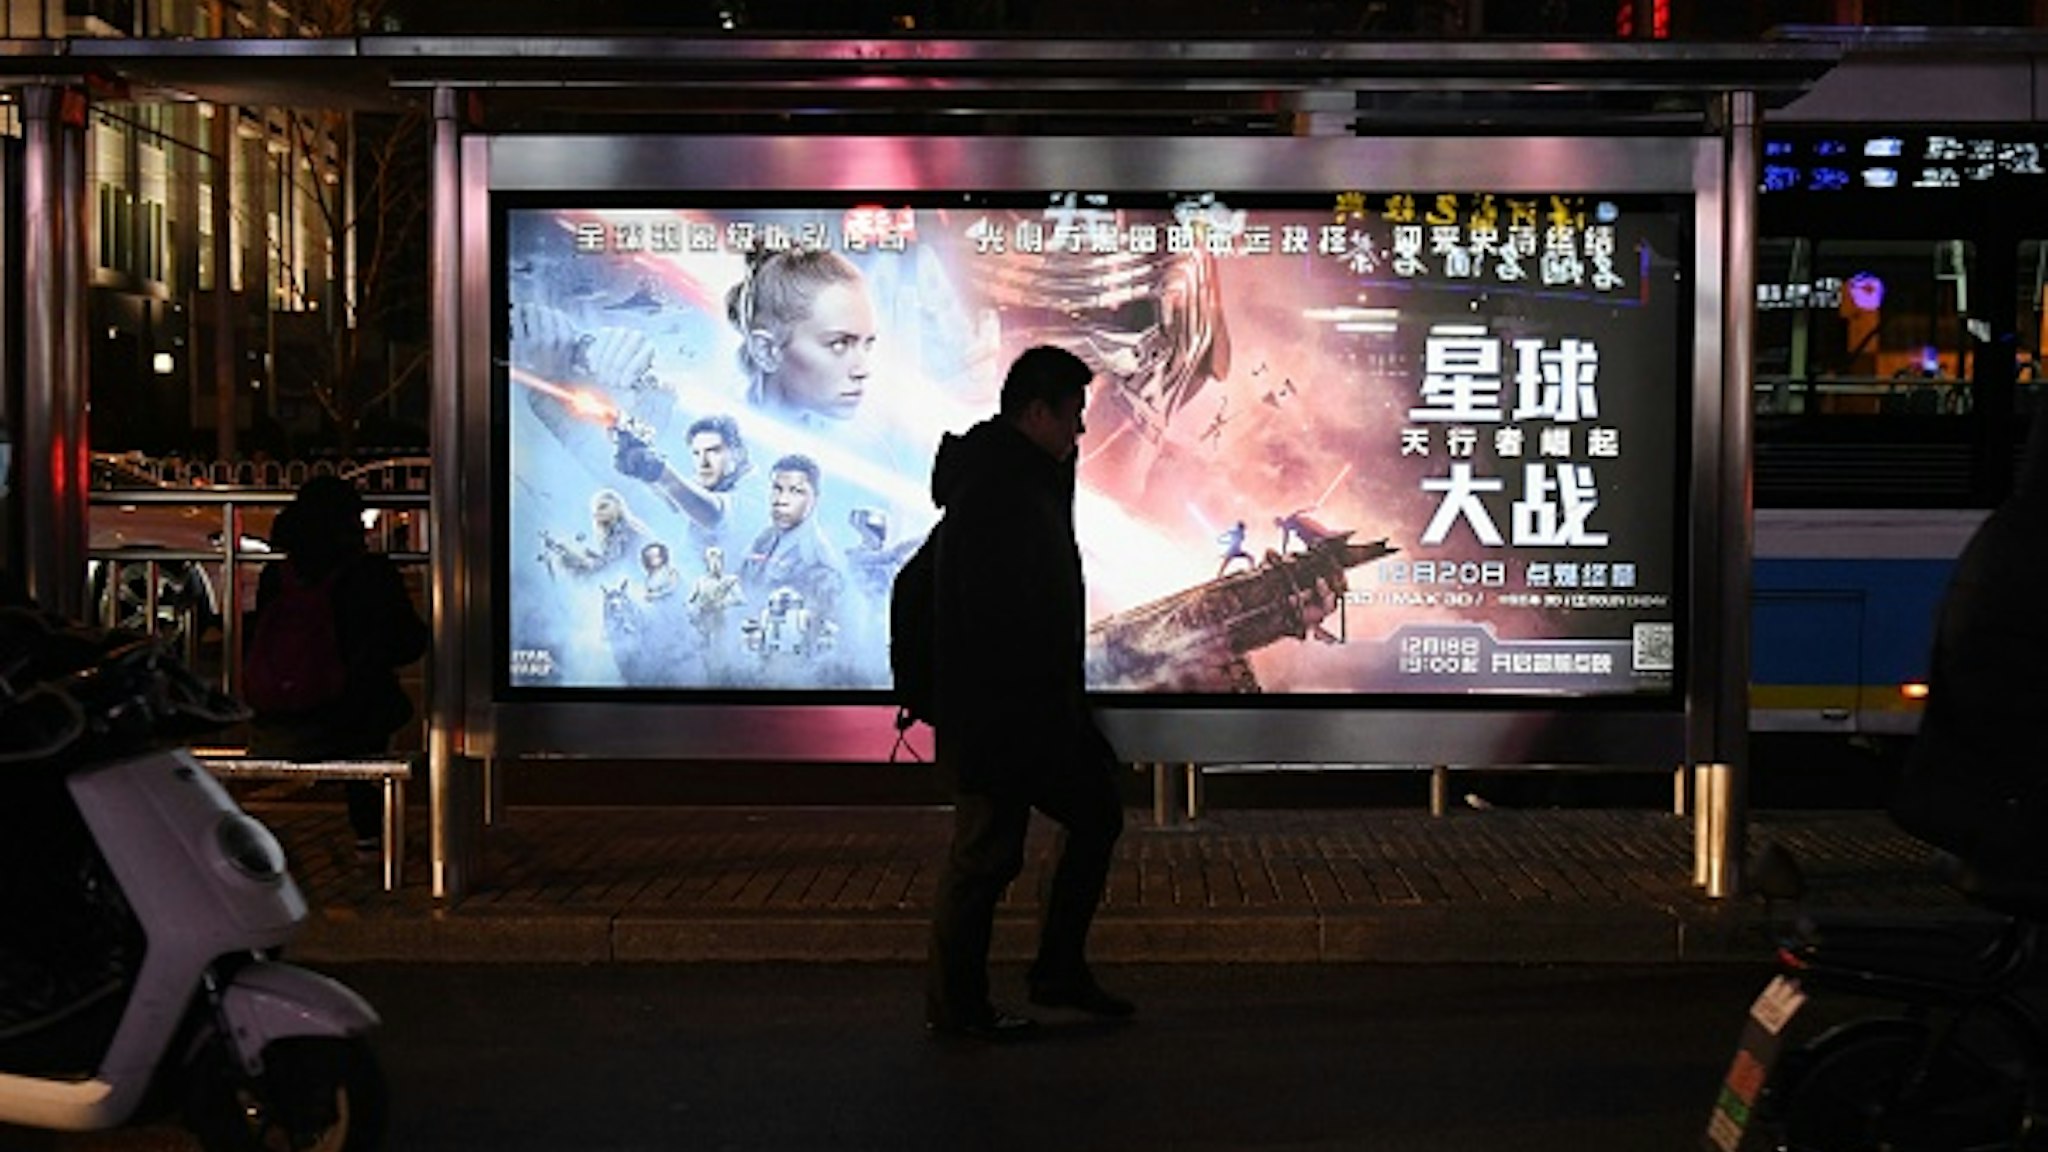 This photo taken on December 19, 2019 shows a man walking past a poster for the latest Star Wars movie, "The Rise of Skywalker", in Beijing. - The movie opens in theaters in China on December 20.